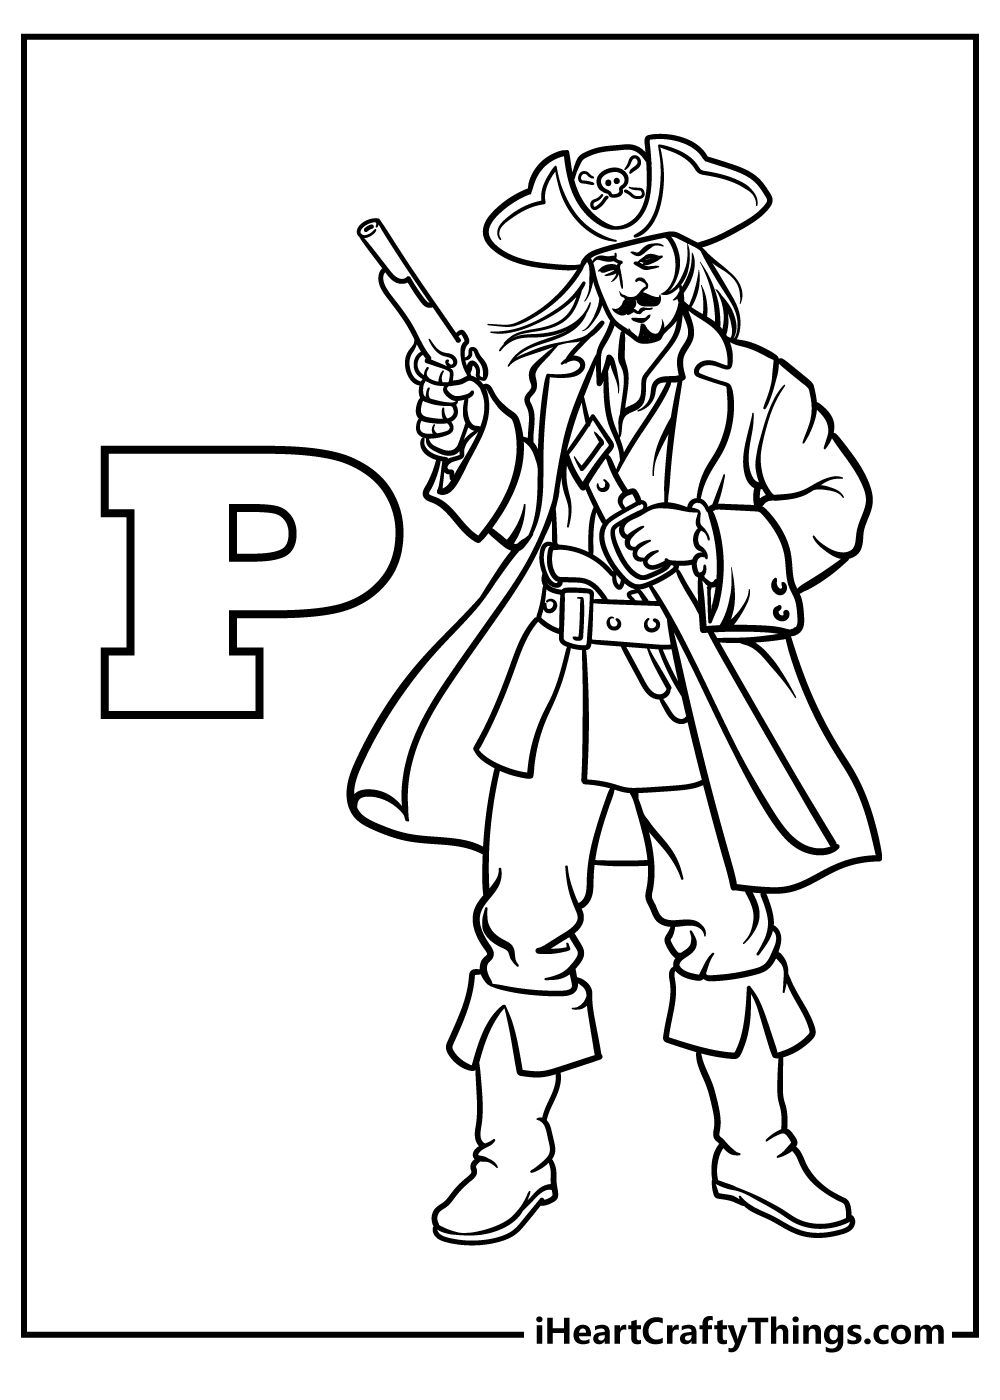 Letter P Coloring Sheet for children free download